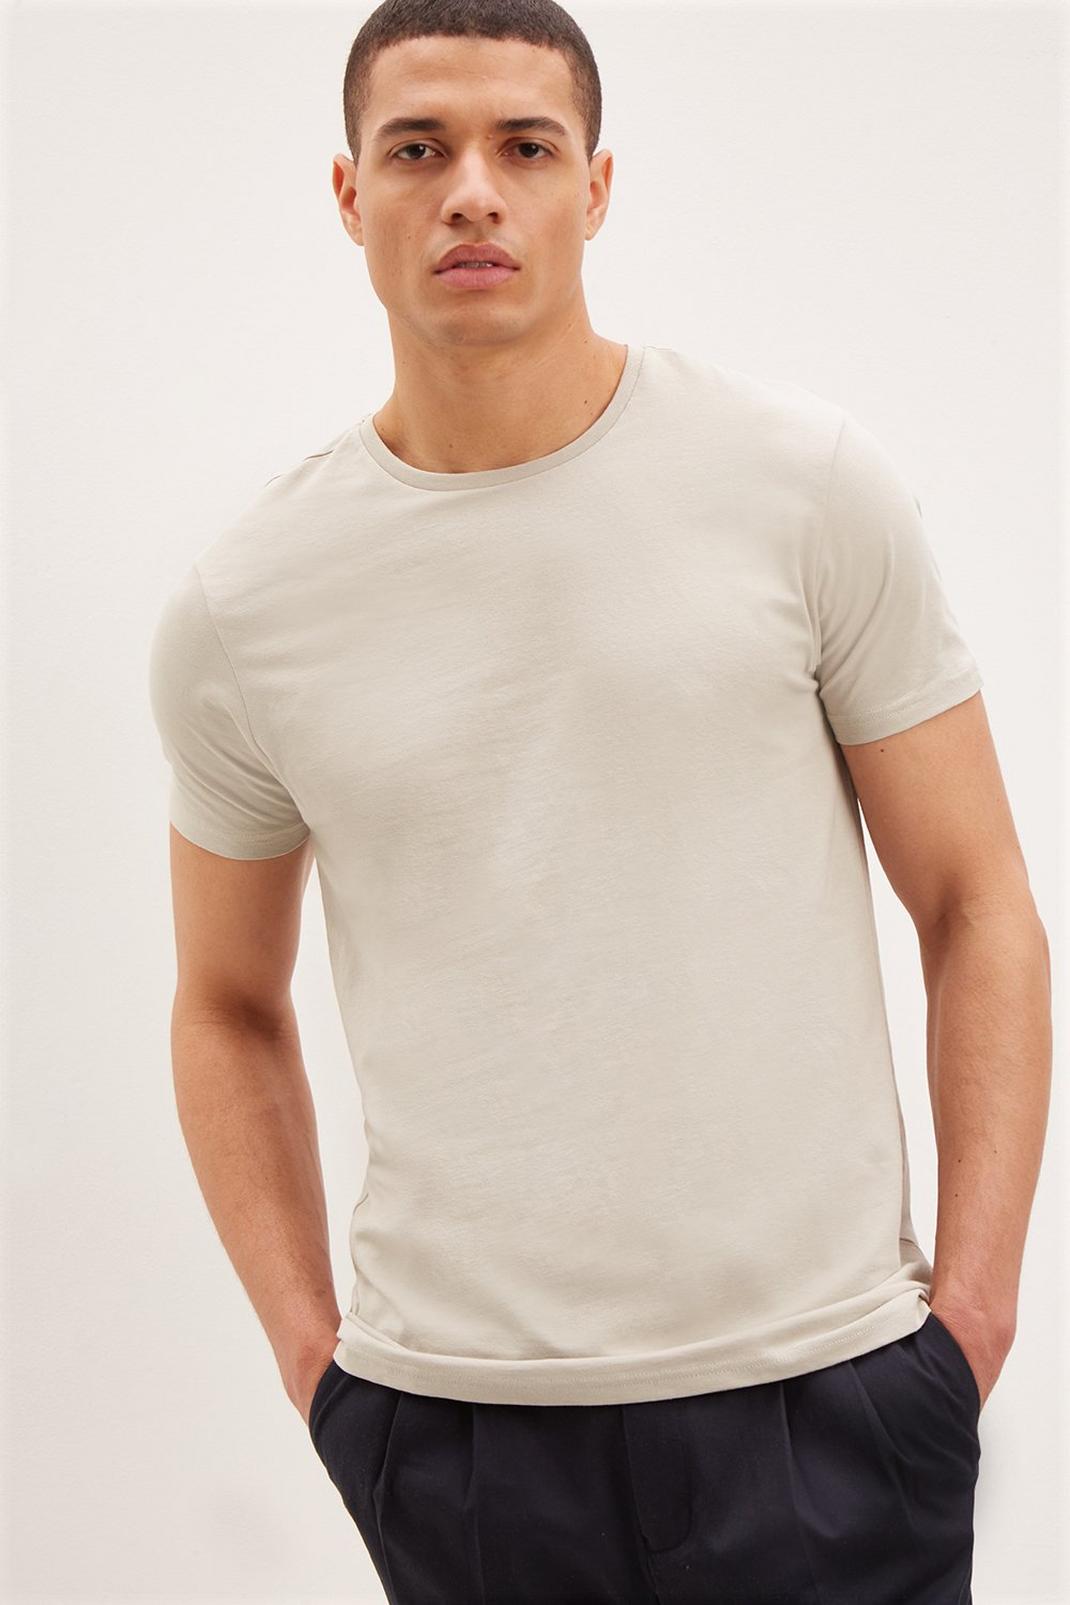 Grey Muscle Fit Short Sleeve T-Shirt image number 1